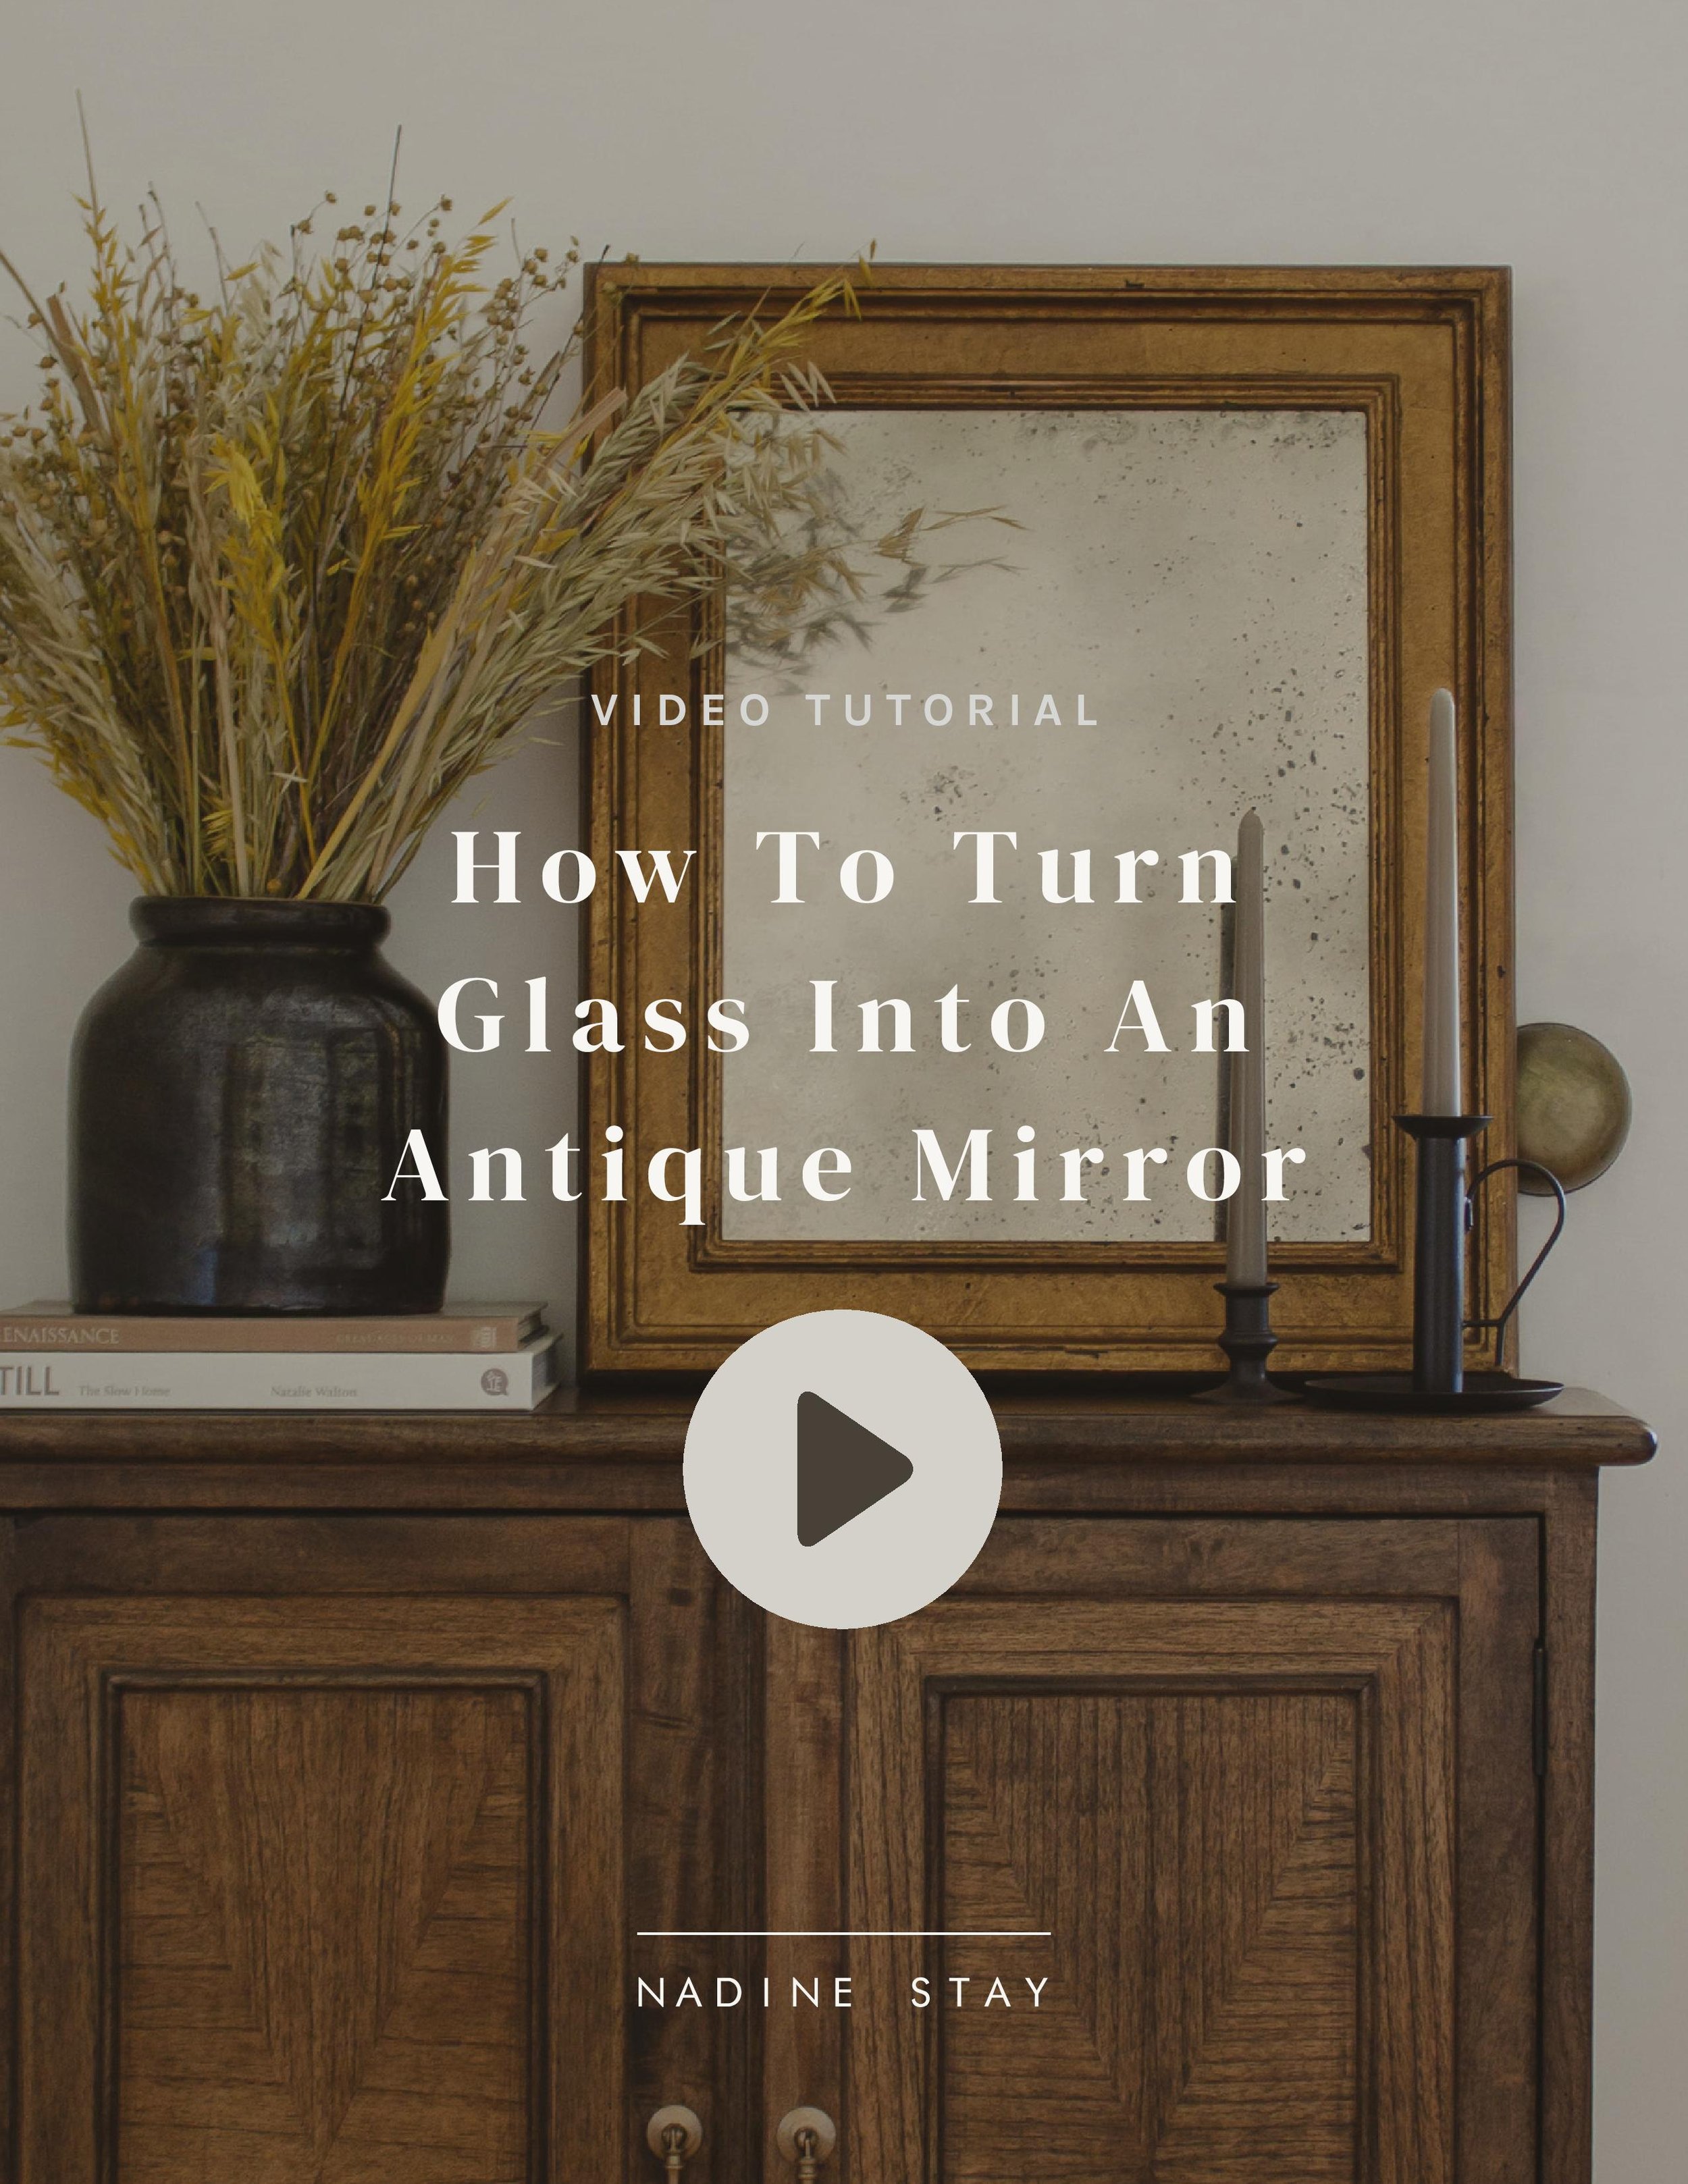 DIY Antique Mirror For Less Than $15 | Nadine Stay - How to make a mirror look old. How to turn glass into an antique mirror. How to turn an antique frame into an aged mirror.